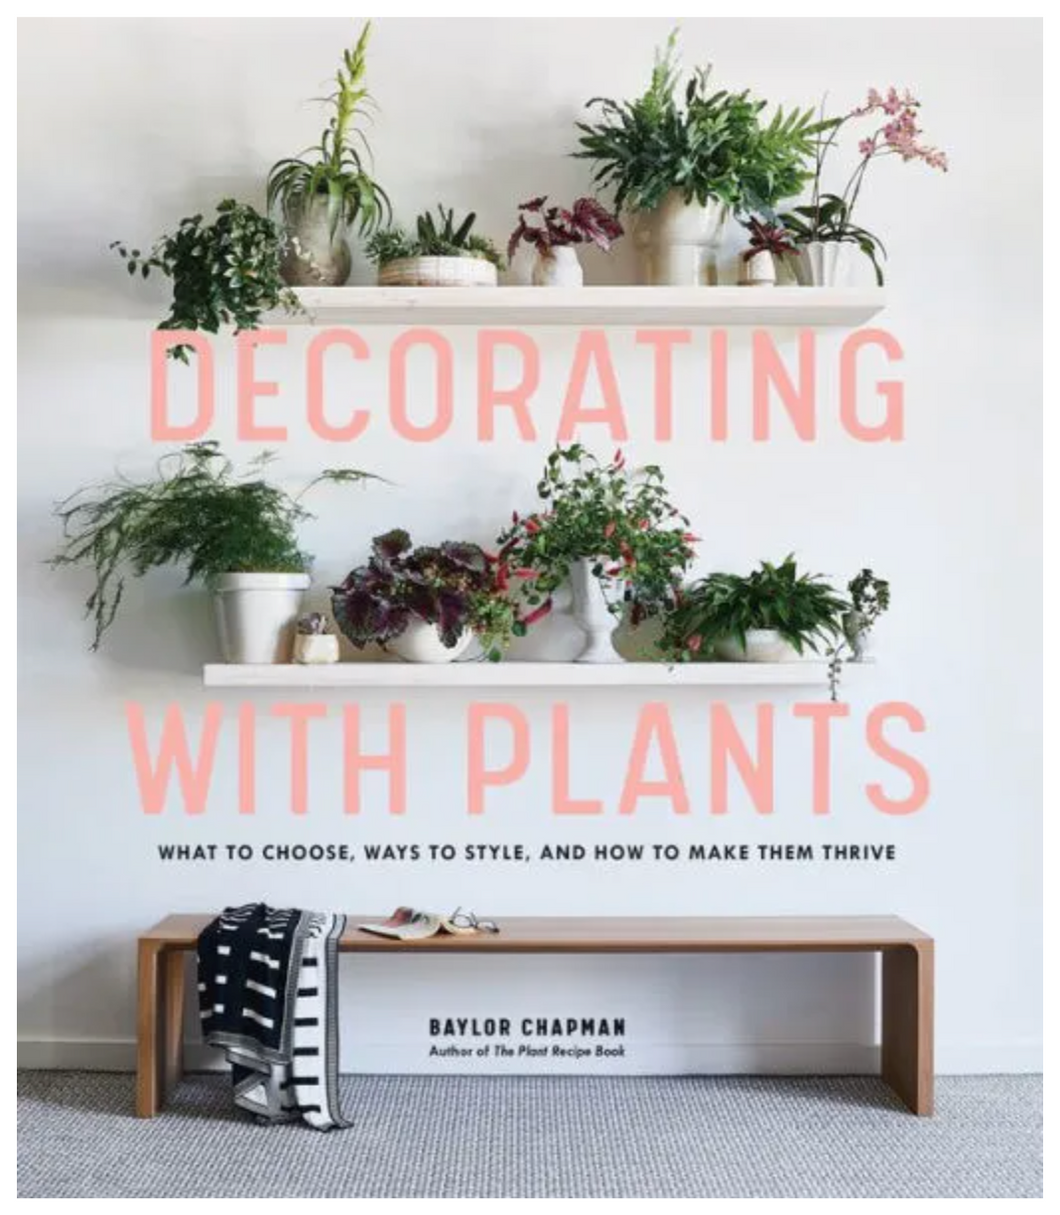 Decorating with Plants: What to Choose, Ways to Style, and How to Make Them Thrive Book